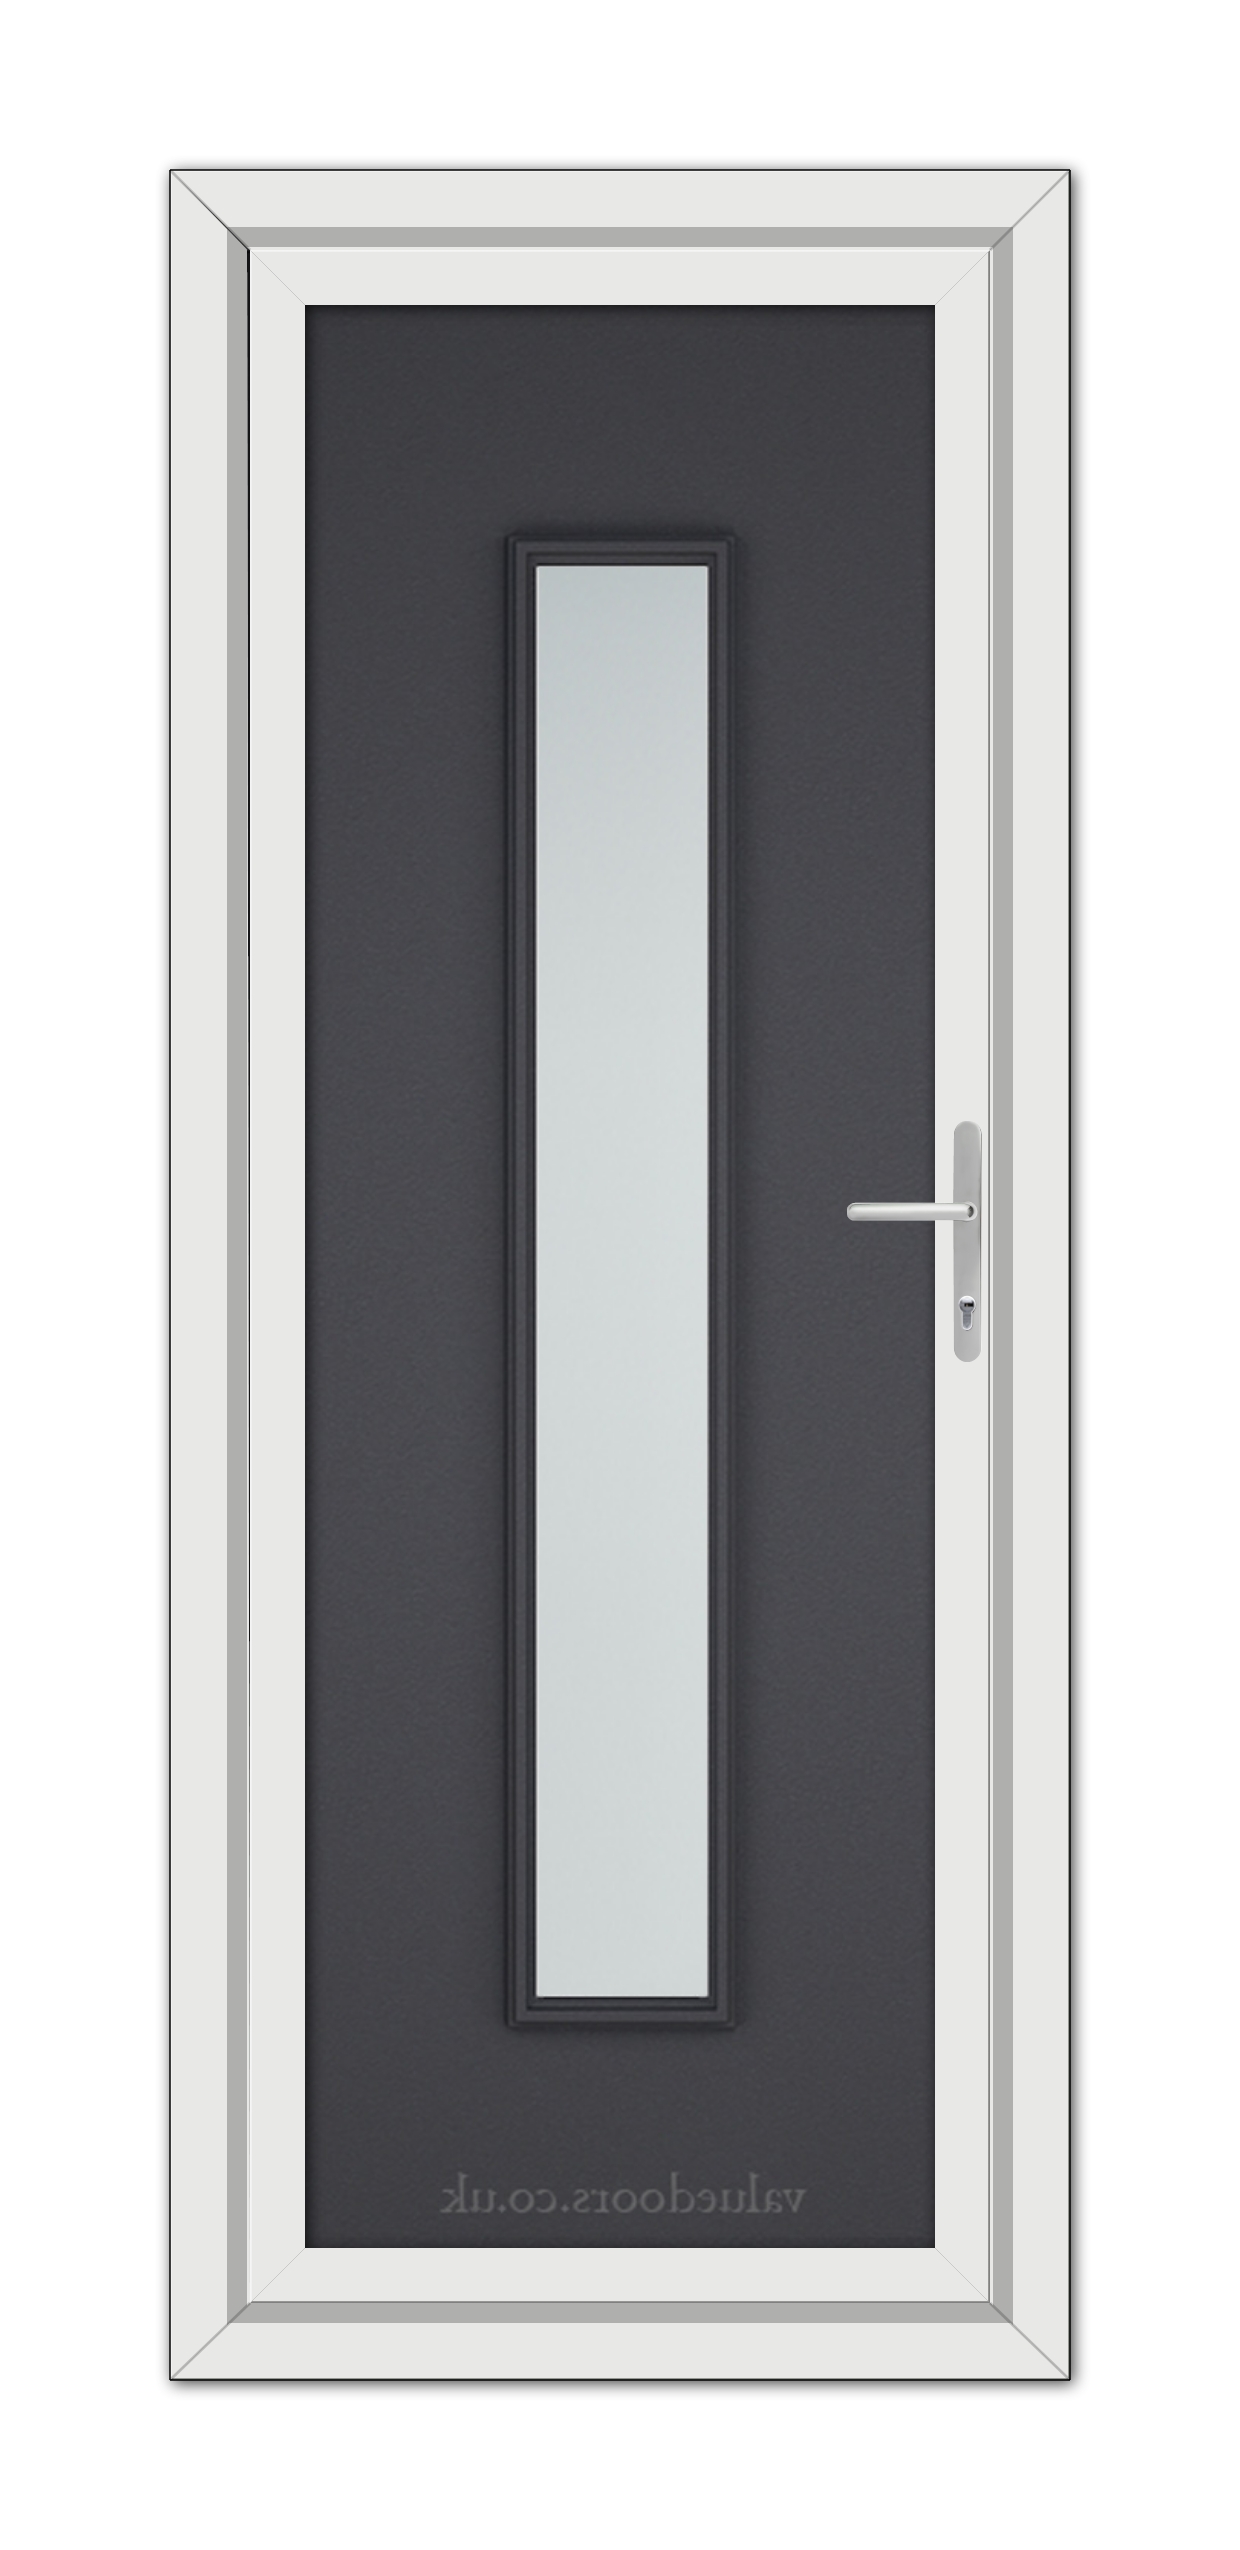 Modern Grey Grained Rome uPVC Door with a vertical glass panel and a metallic handle, framed by a white border.